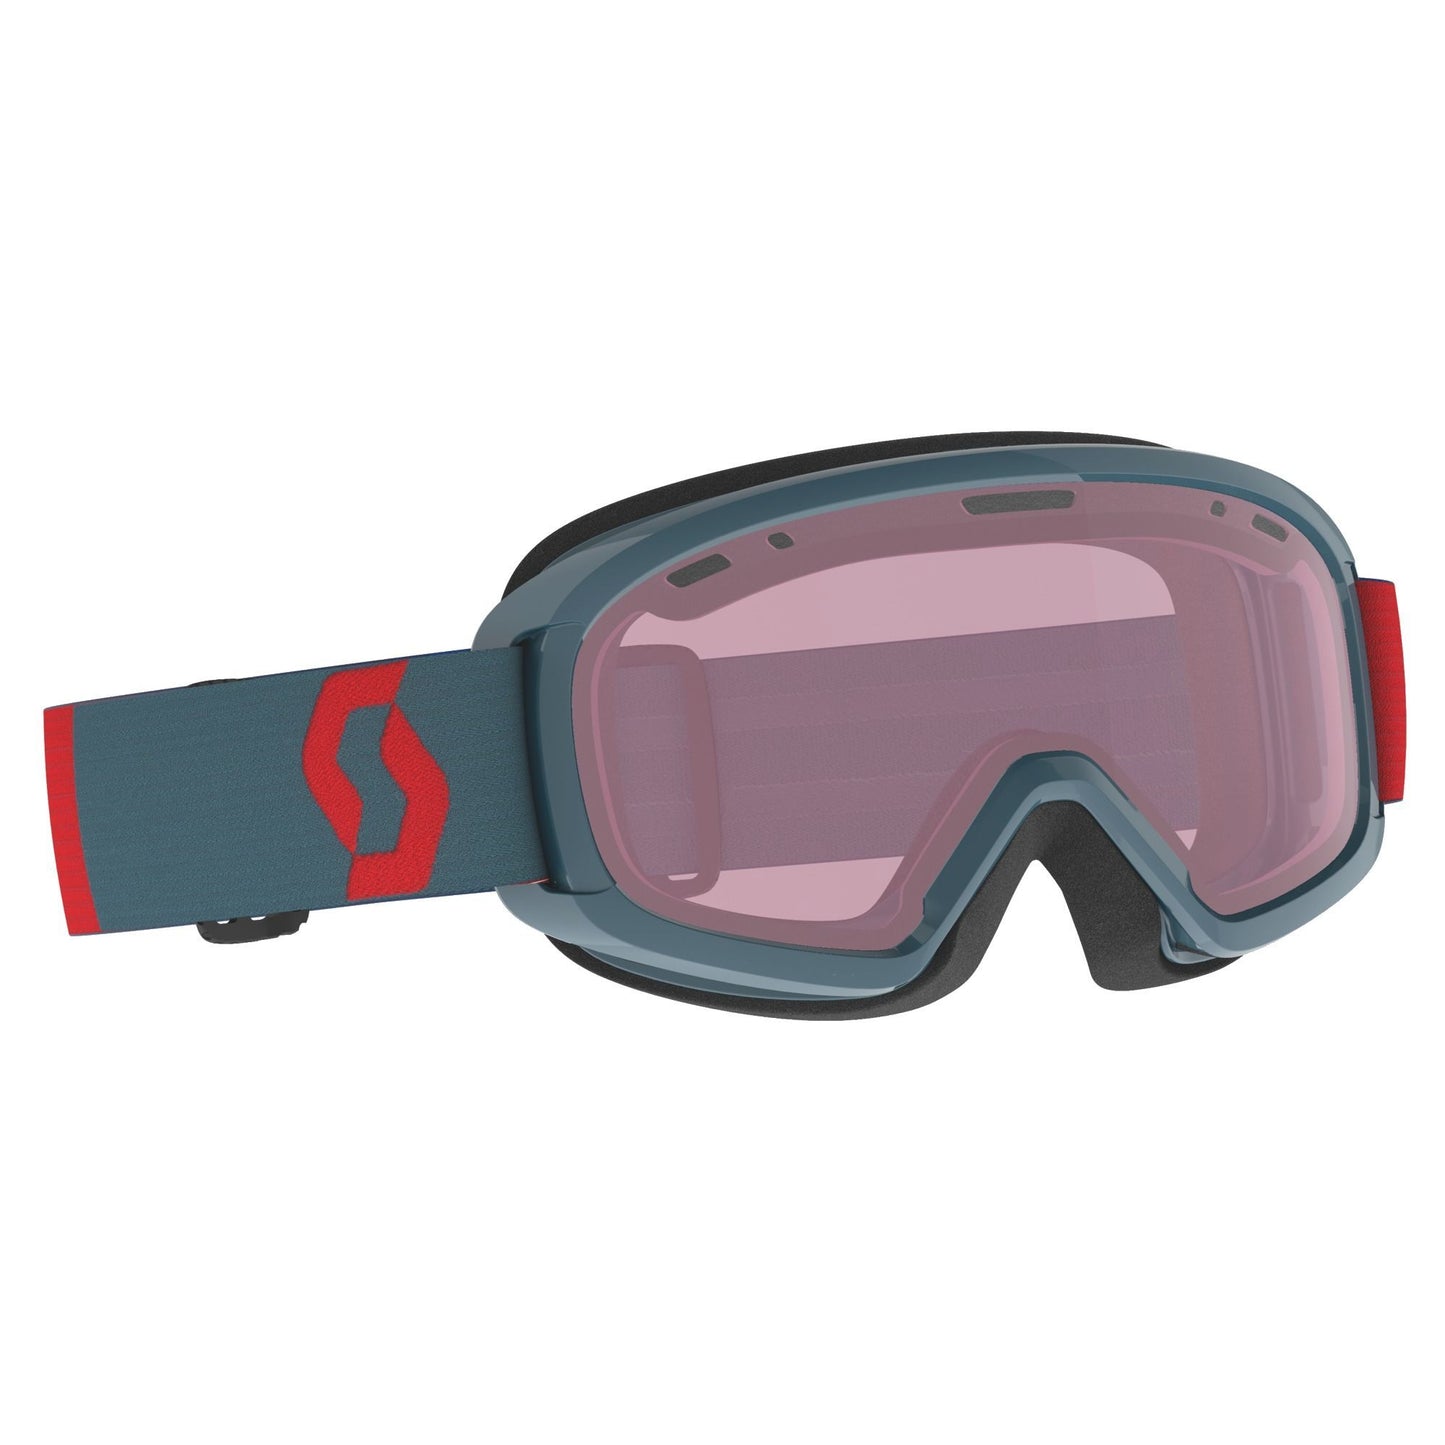 Scott Youth Jr Witty Snow Goggle Neon Red Aruba Green Enhancer Snow Goggles